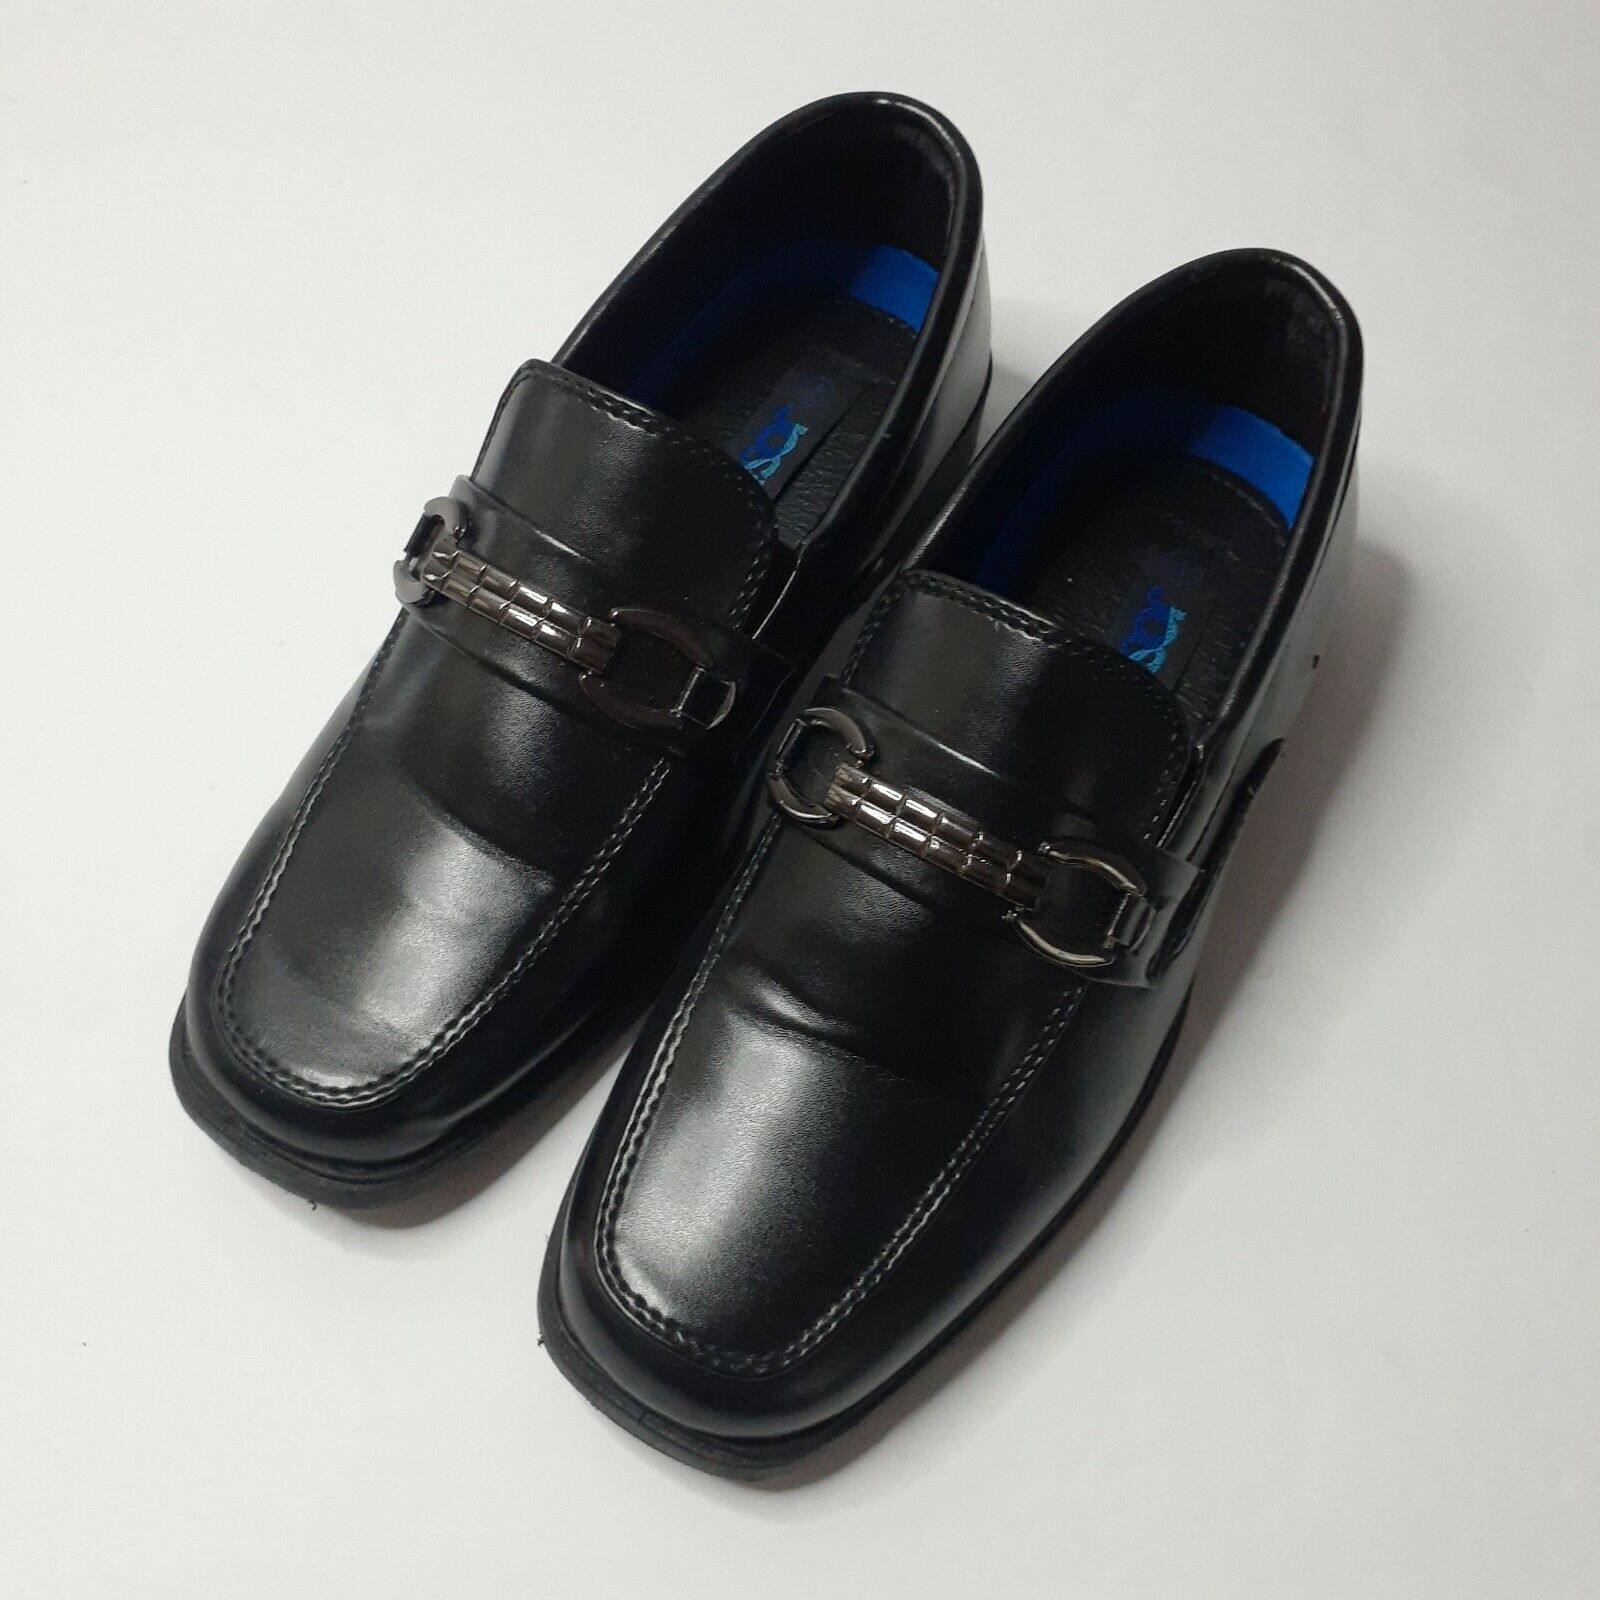 Boys Size 1 Dress Shoes Loafers Slip On Buckle Patent Josmo Black